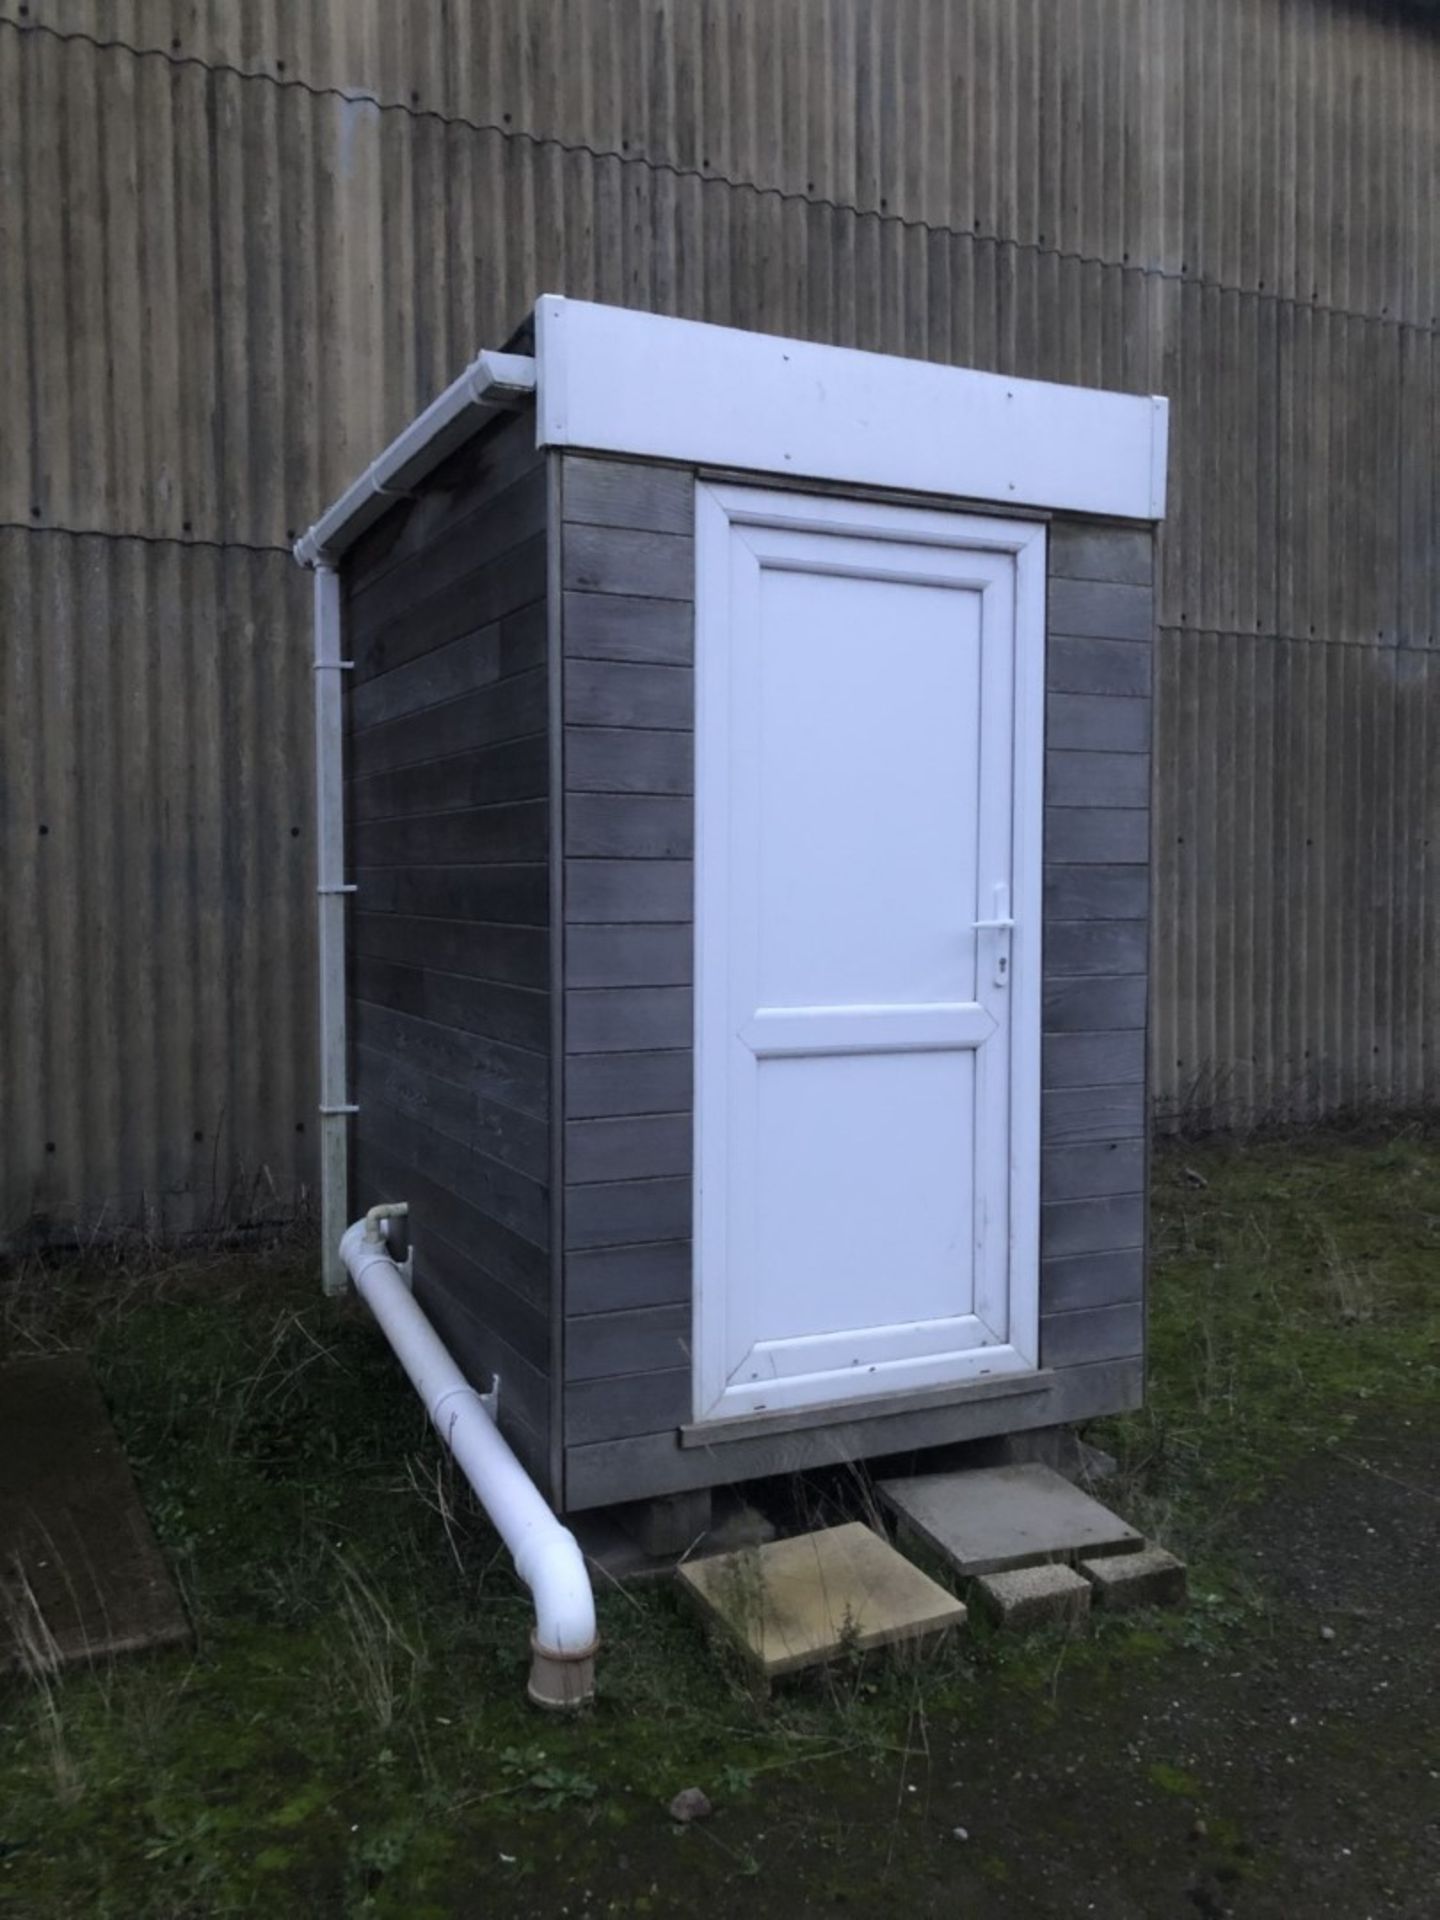 A modular toilet, 1.6m wide, 2.1m long, and Smoking Shelter of similar size, (2) For Sale by TENDER,